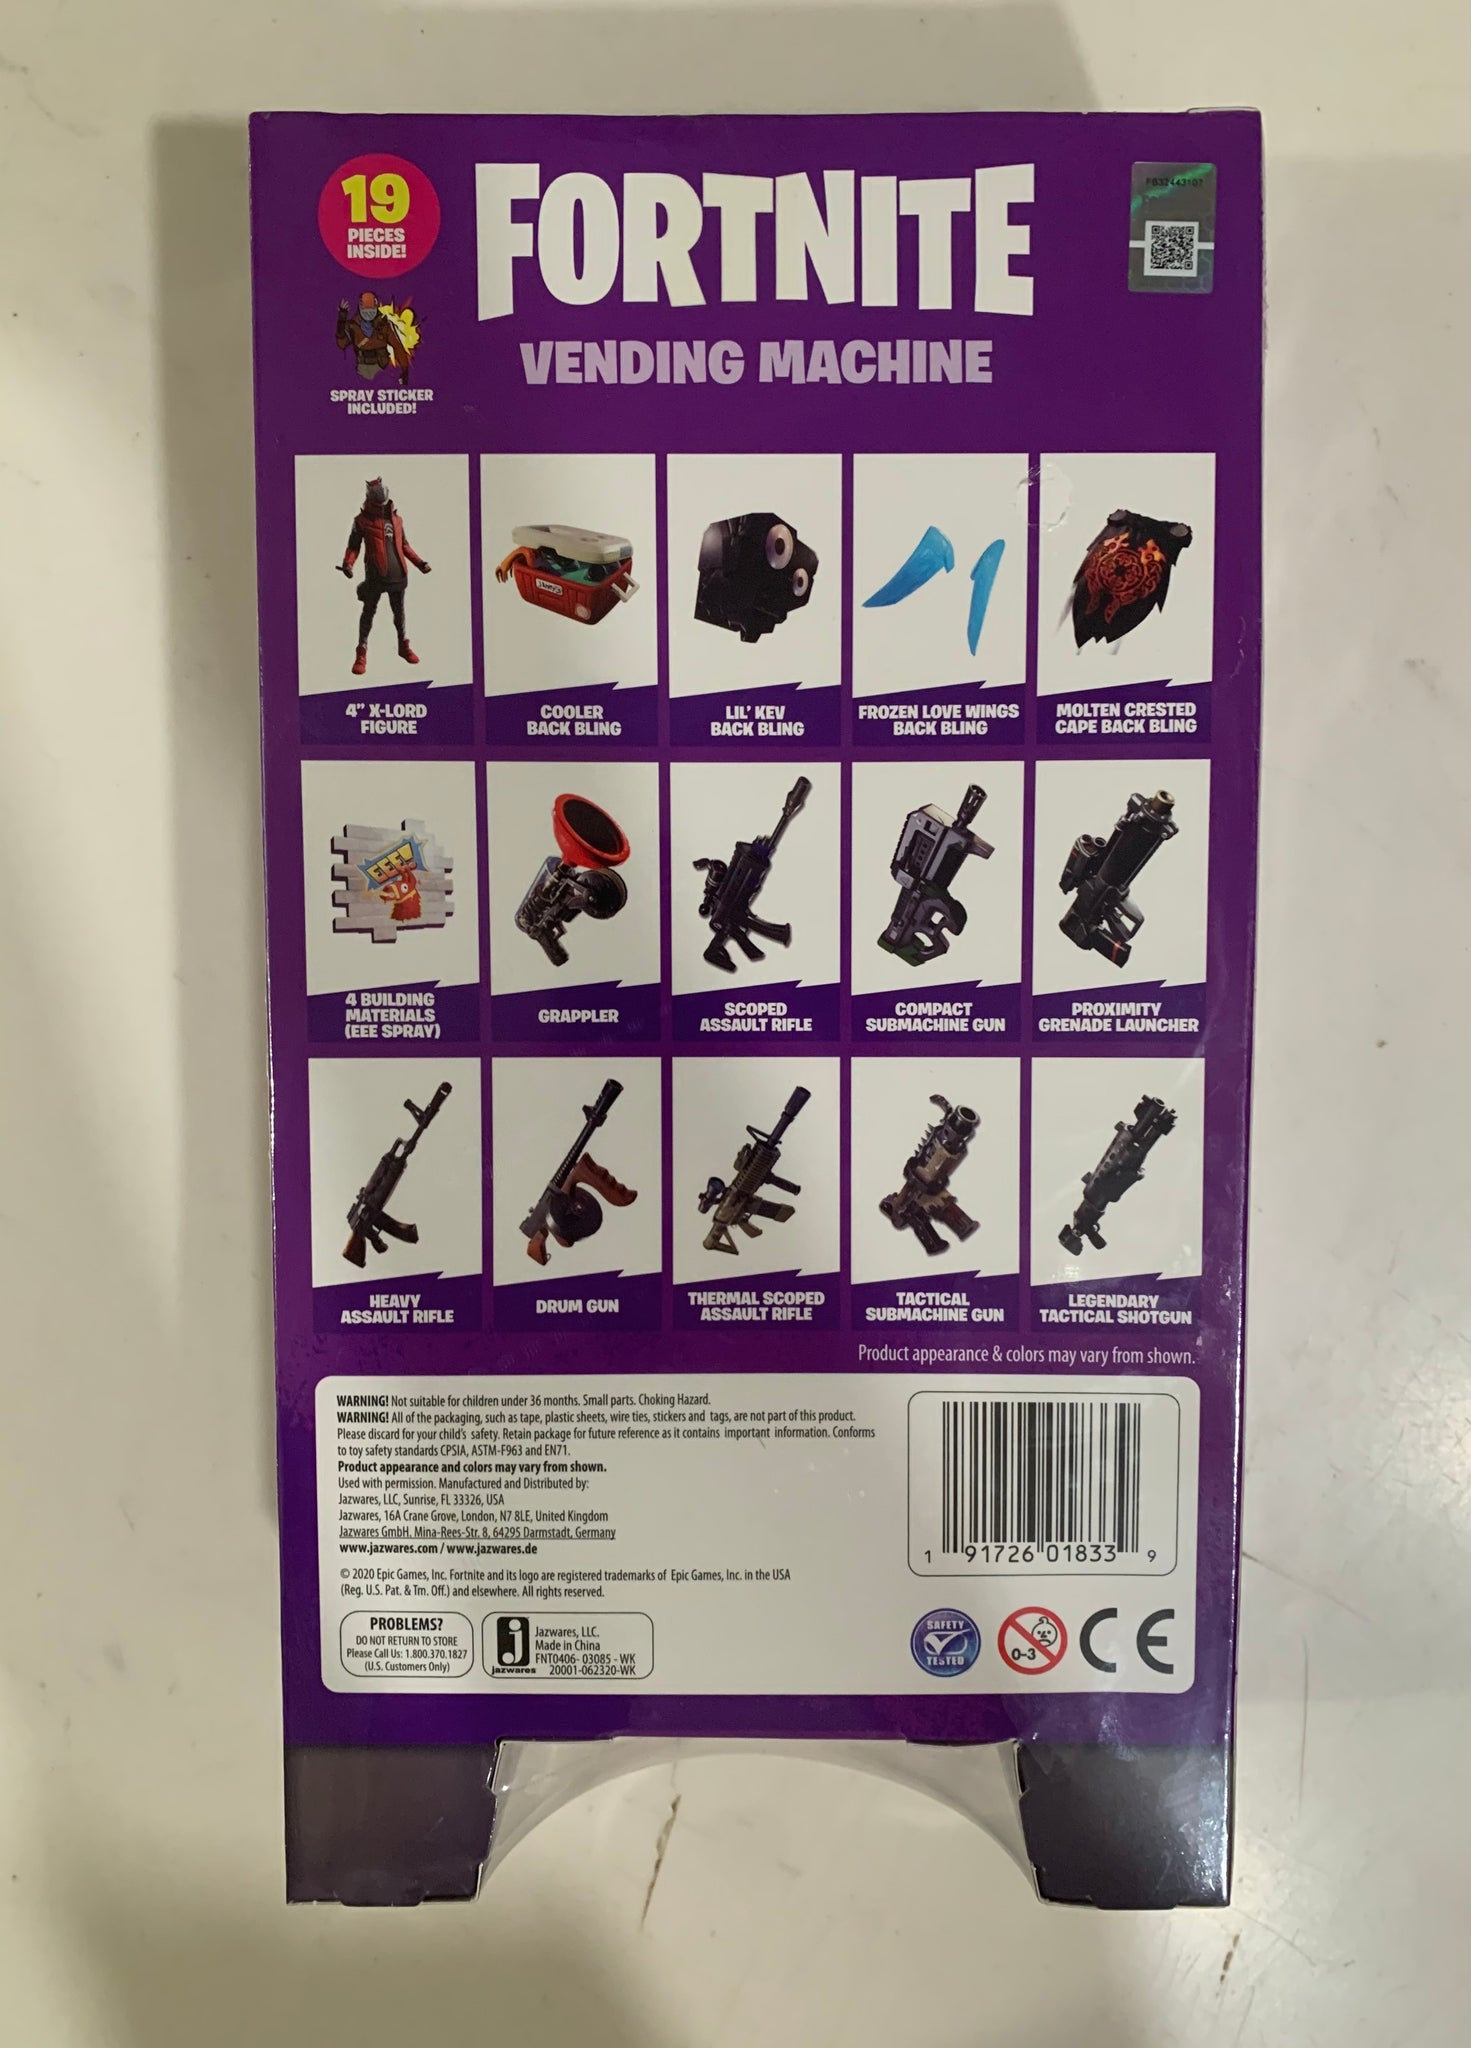 Fortnite Vending Machine, Features 4 Inch X-Lord Action Figure, Includes 9  Weapons, 4 Back Bling, and 4 Building Material Pieces